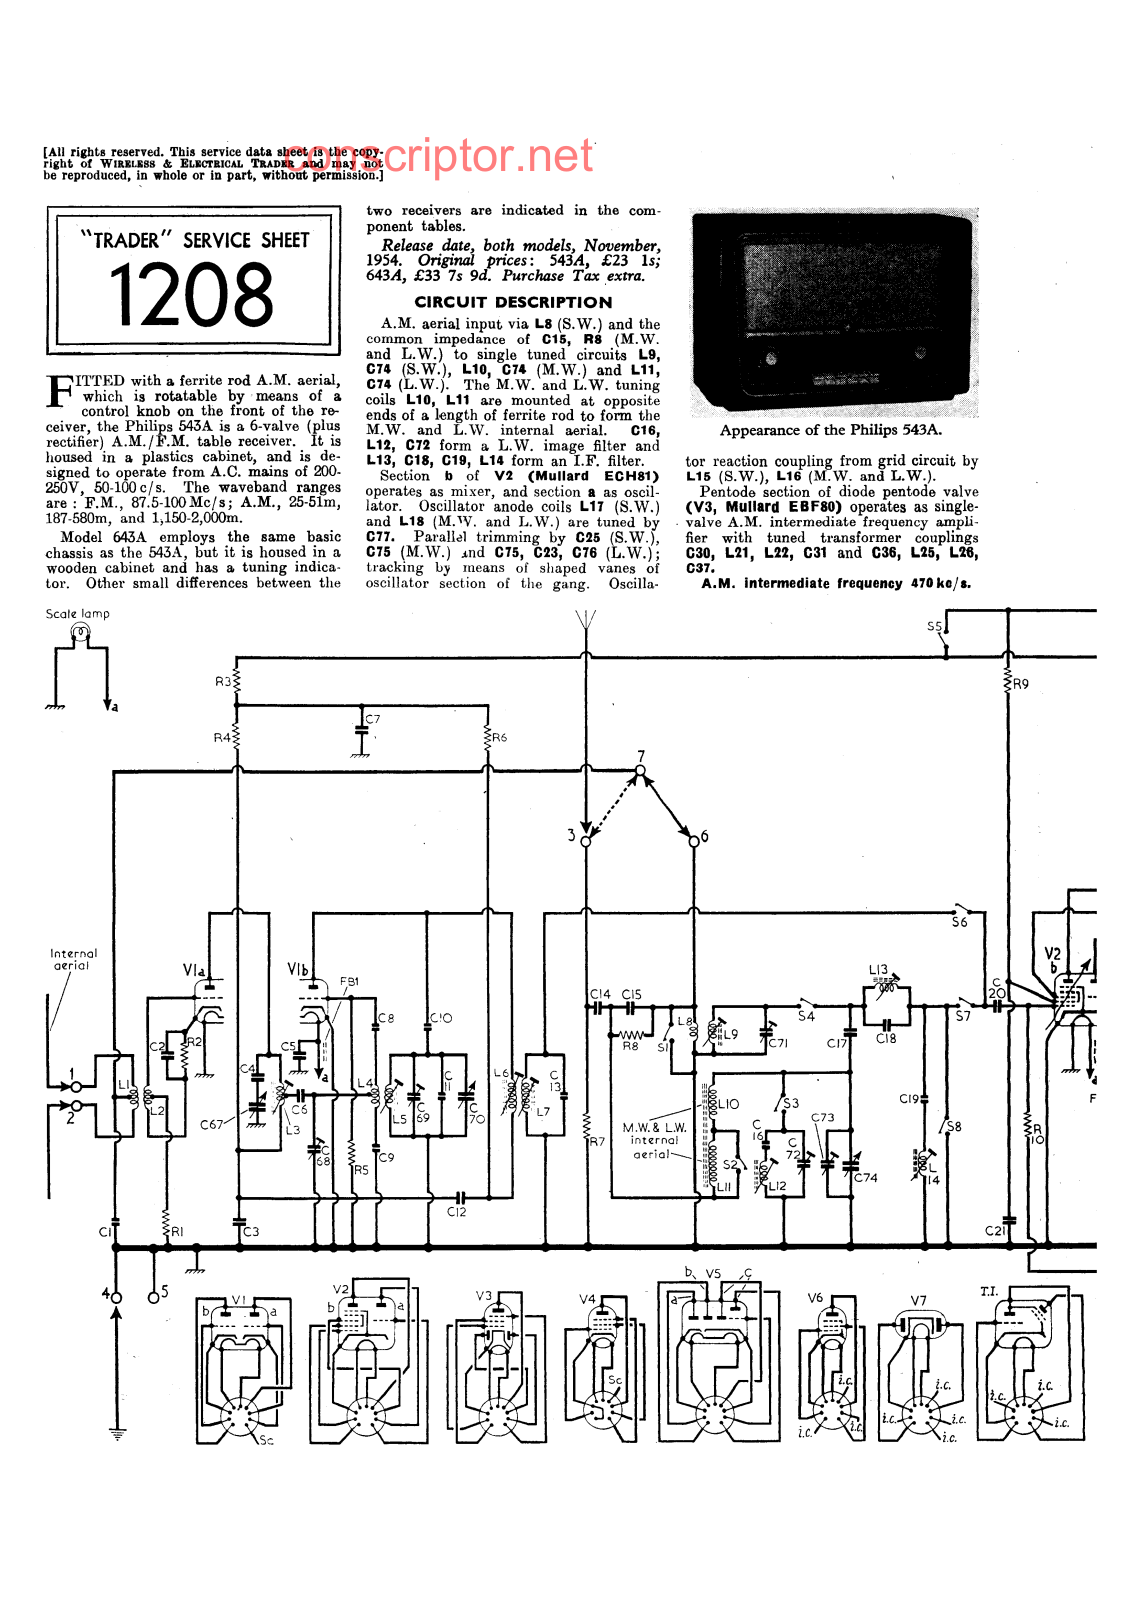 Philips 543A Service manual